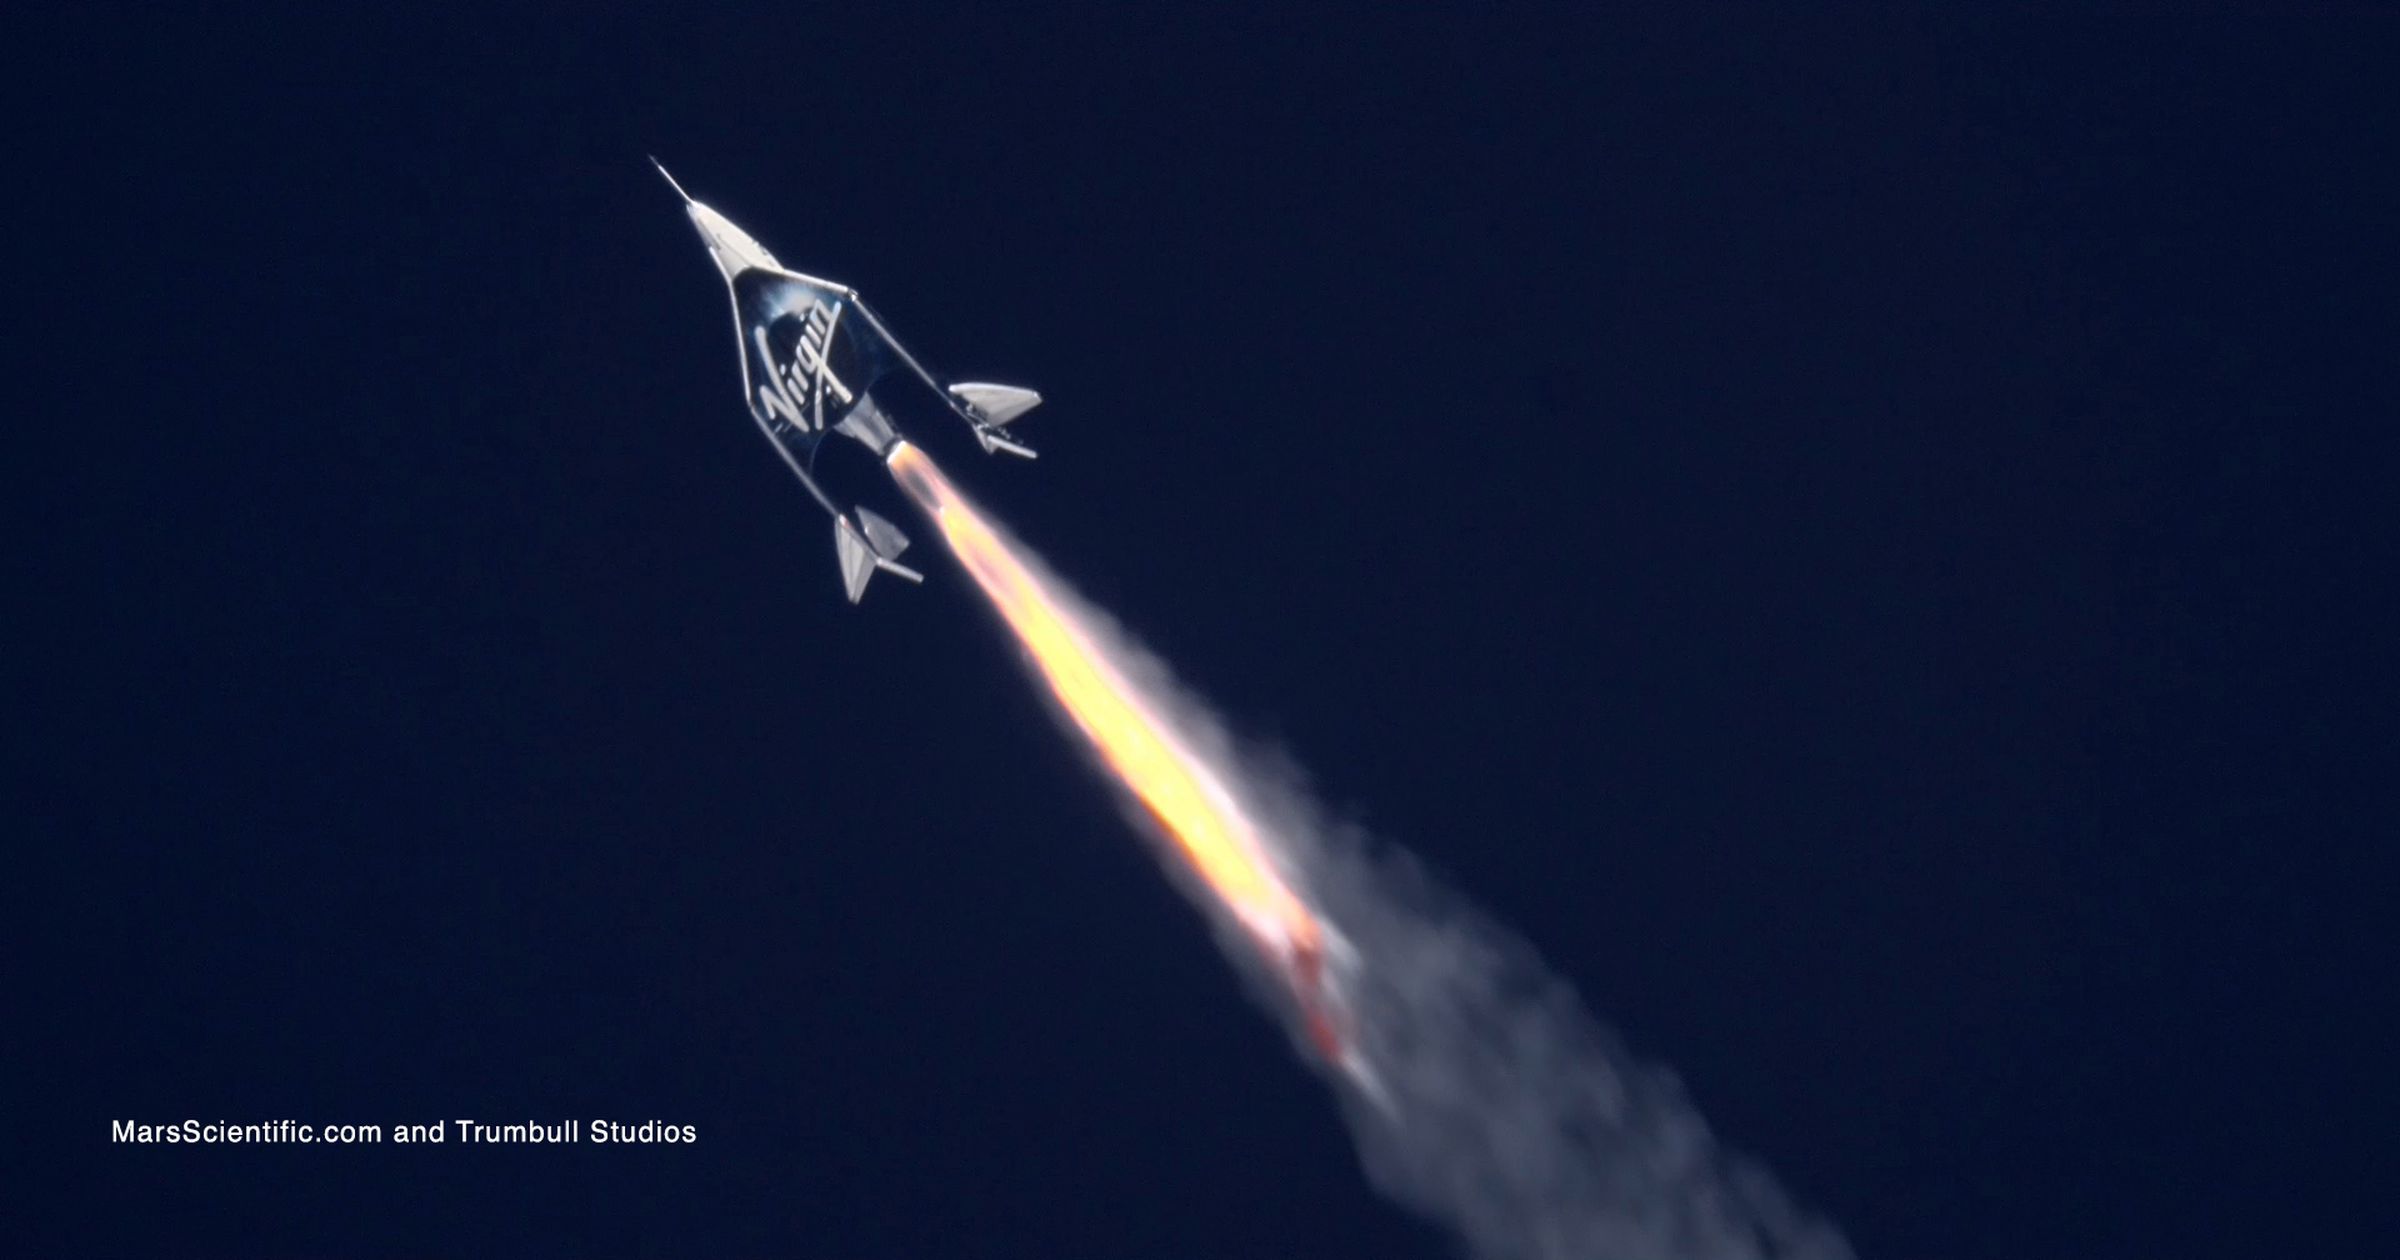 VSS Unity with its engine ignited